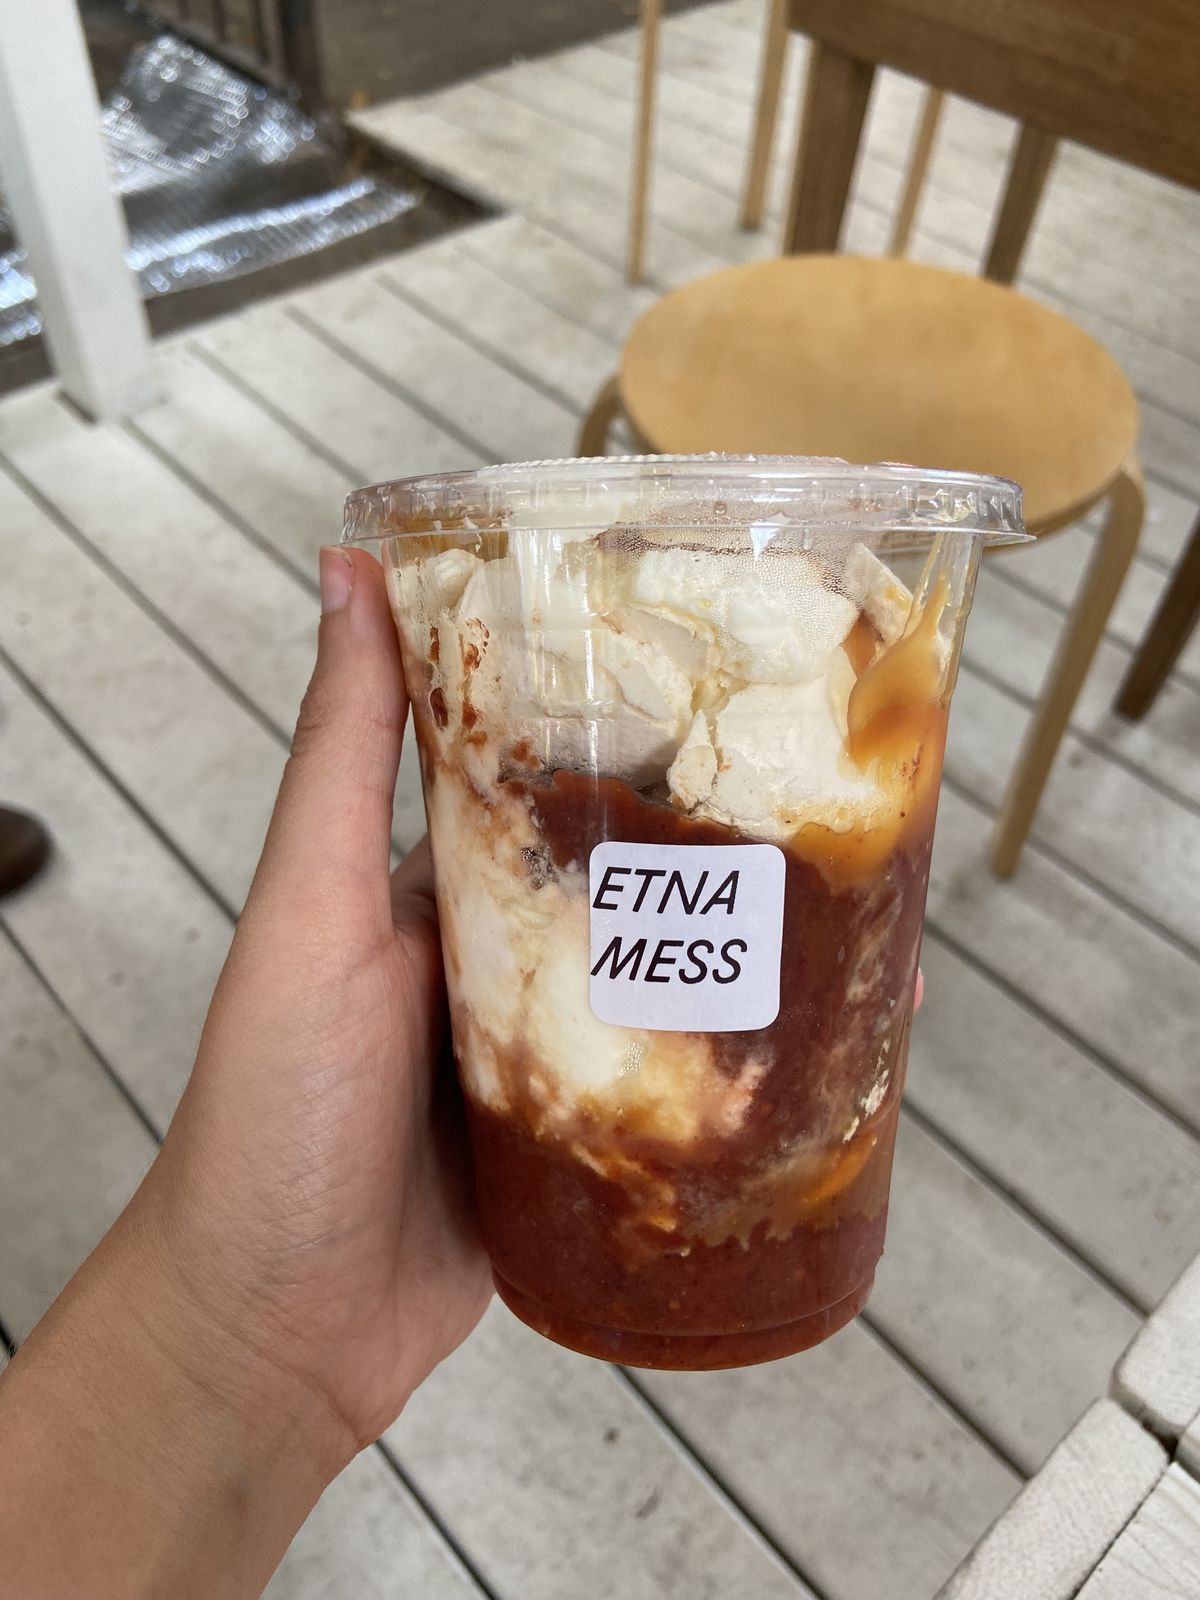 A hand holds a plastic cup with an Etna Mess label filled with tomatoes, strawberries, meringue, and caramel.